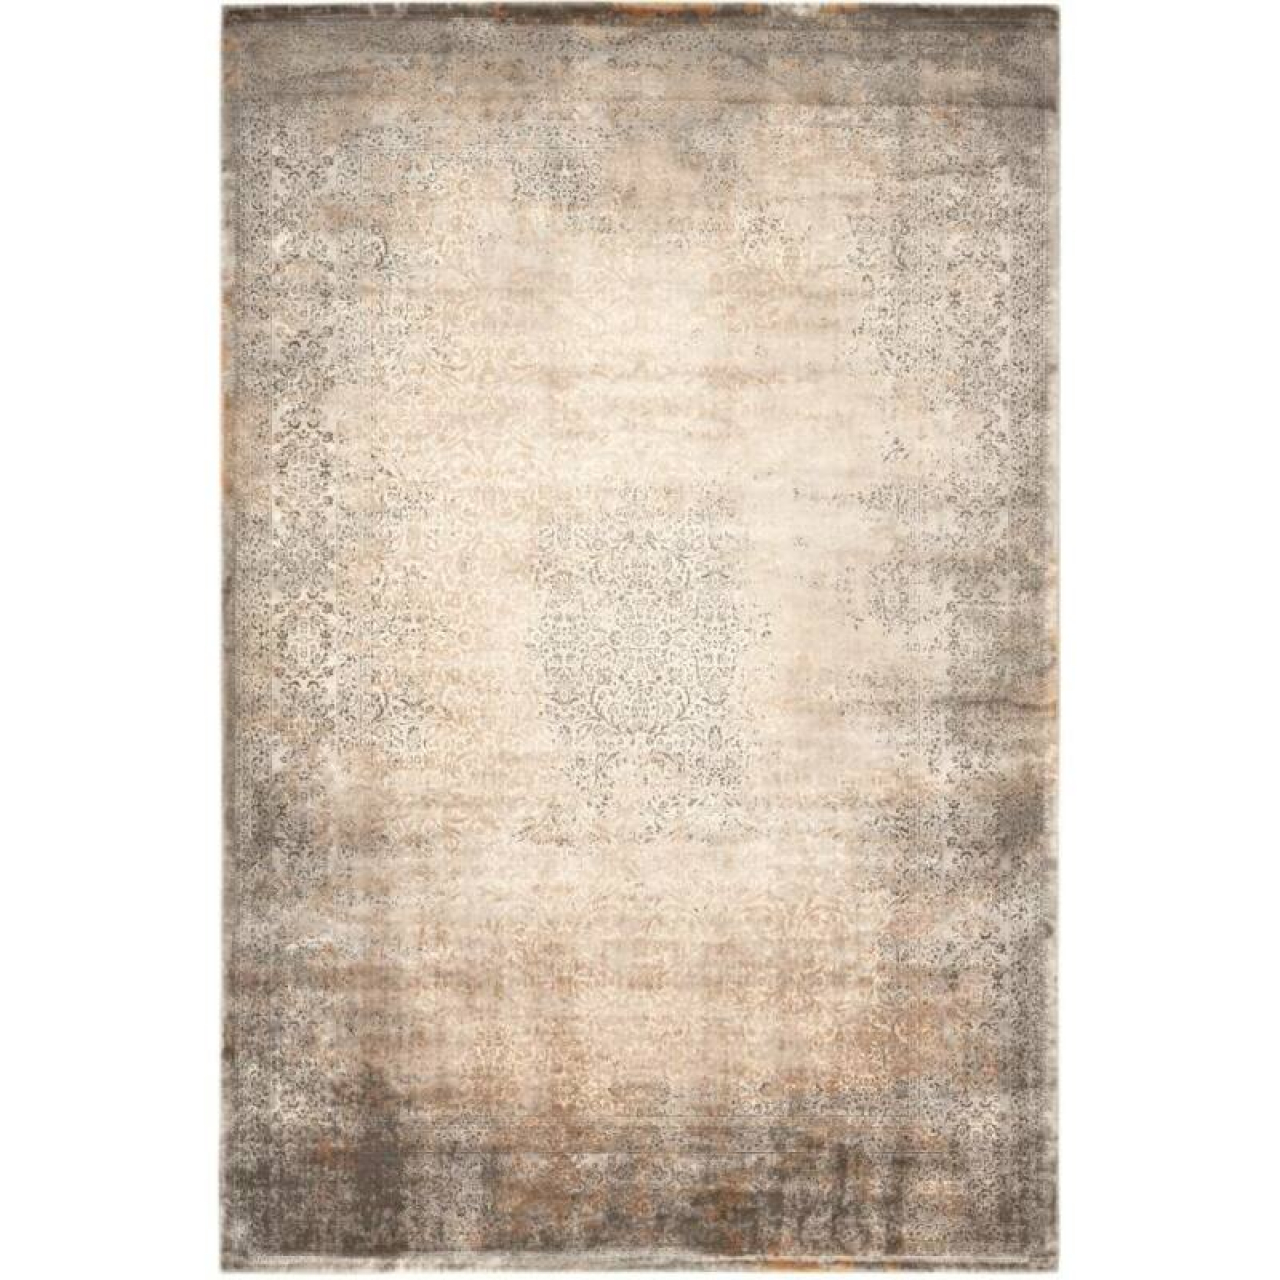 Obsession Haute Couture Jewel 954 Taupe szőnyeg-160x230